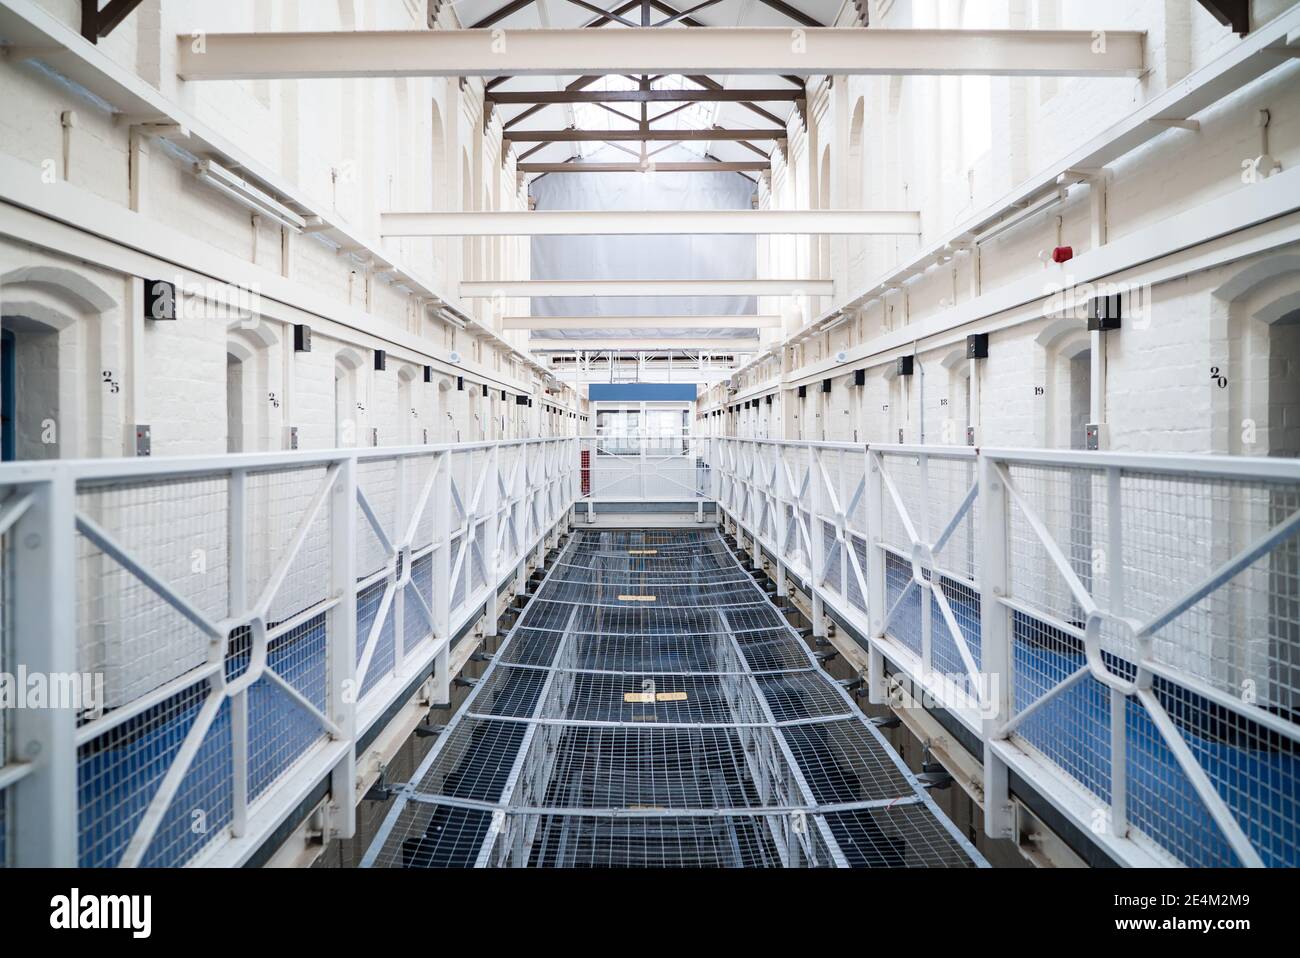 Looking into prison cell block landing victorian British English jail house bed in room lock up high security room derelict old new category A B C Stock Photo